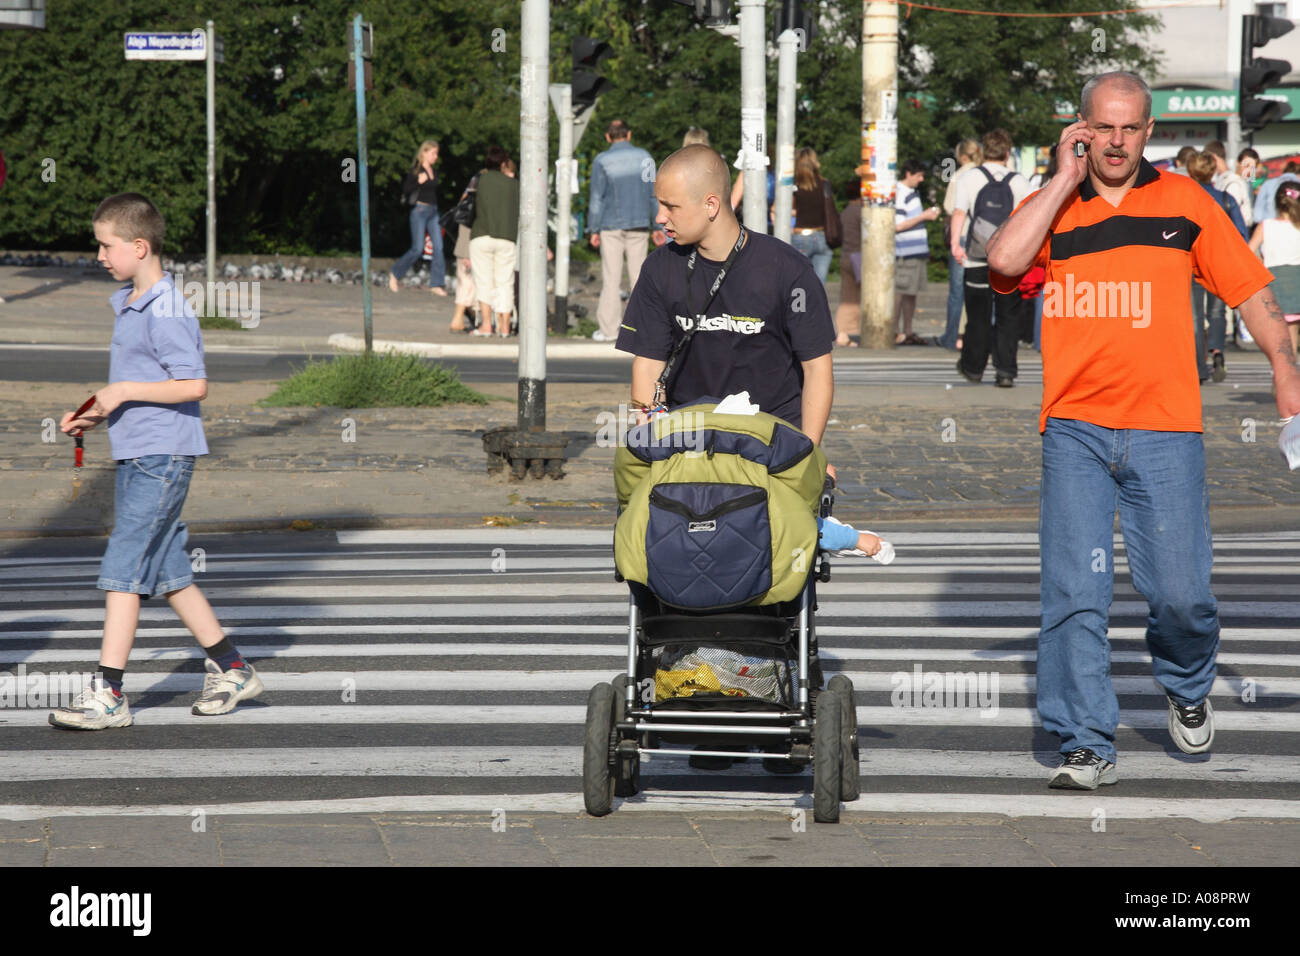 Pedestrians crossing a street in Sczeczin, Poland. A young man is pushing a pram Stock Photo